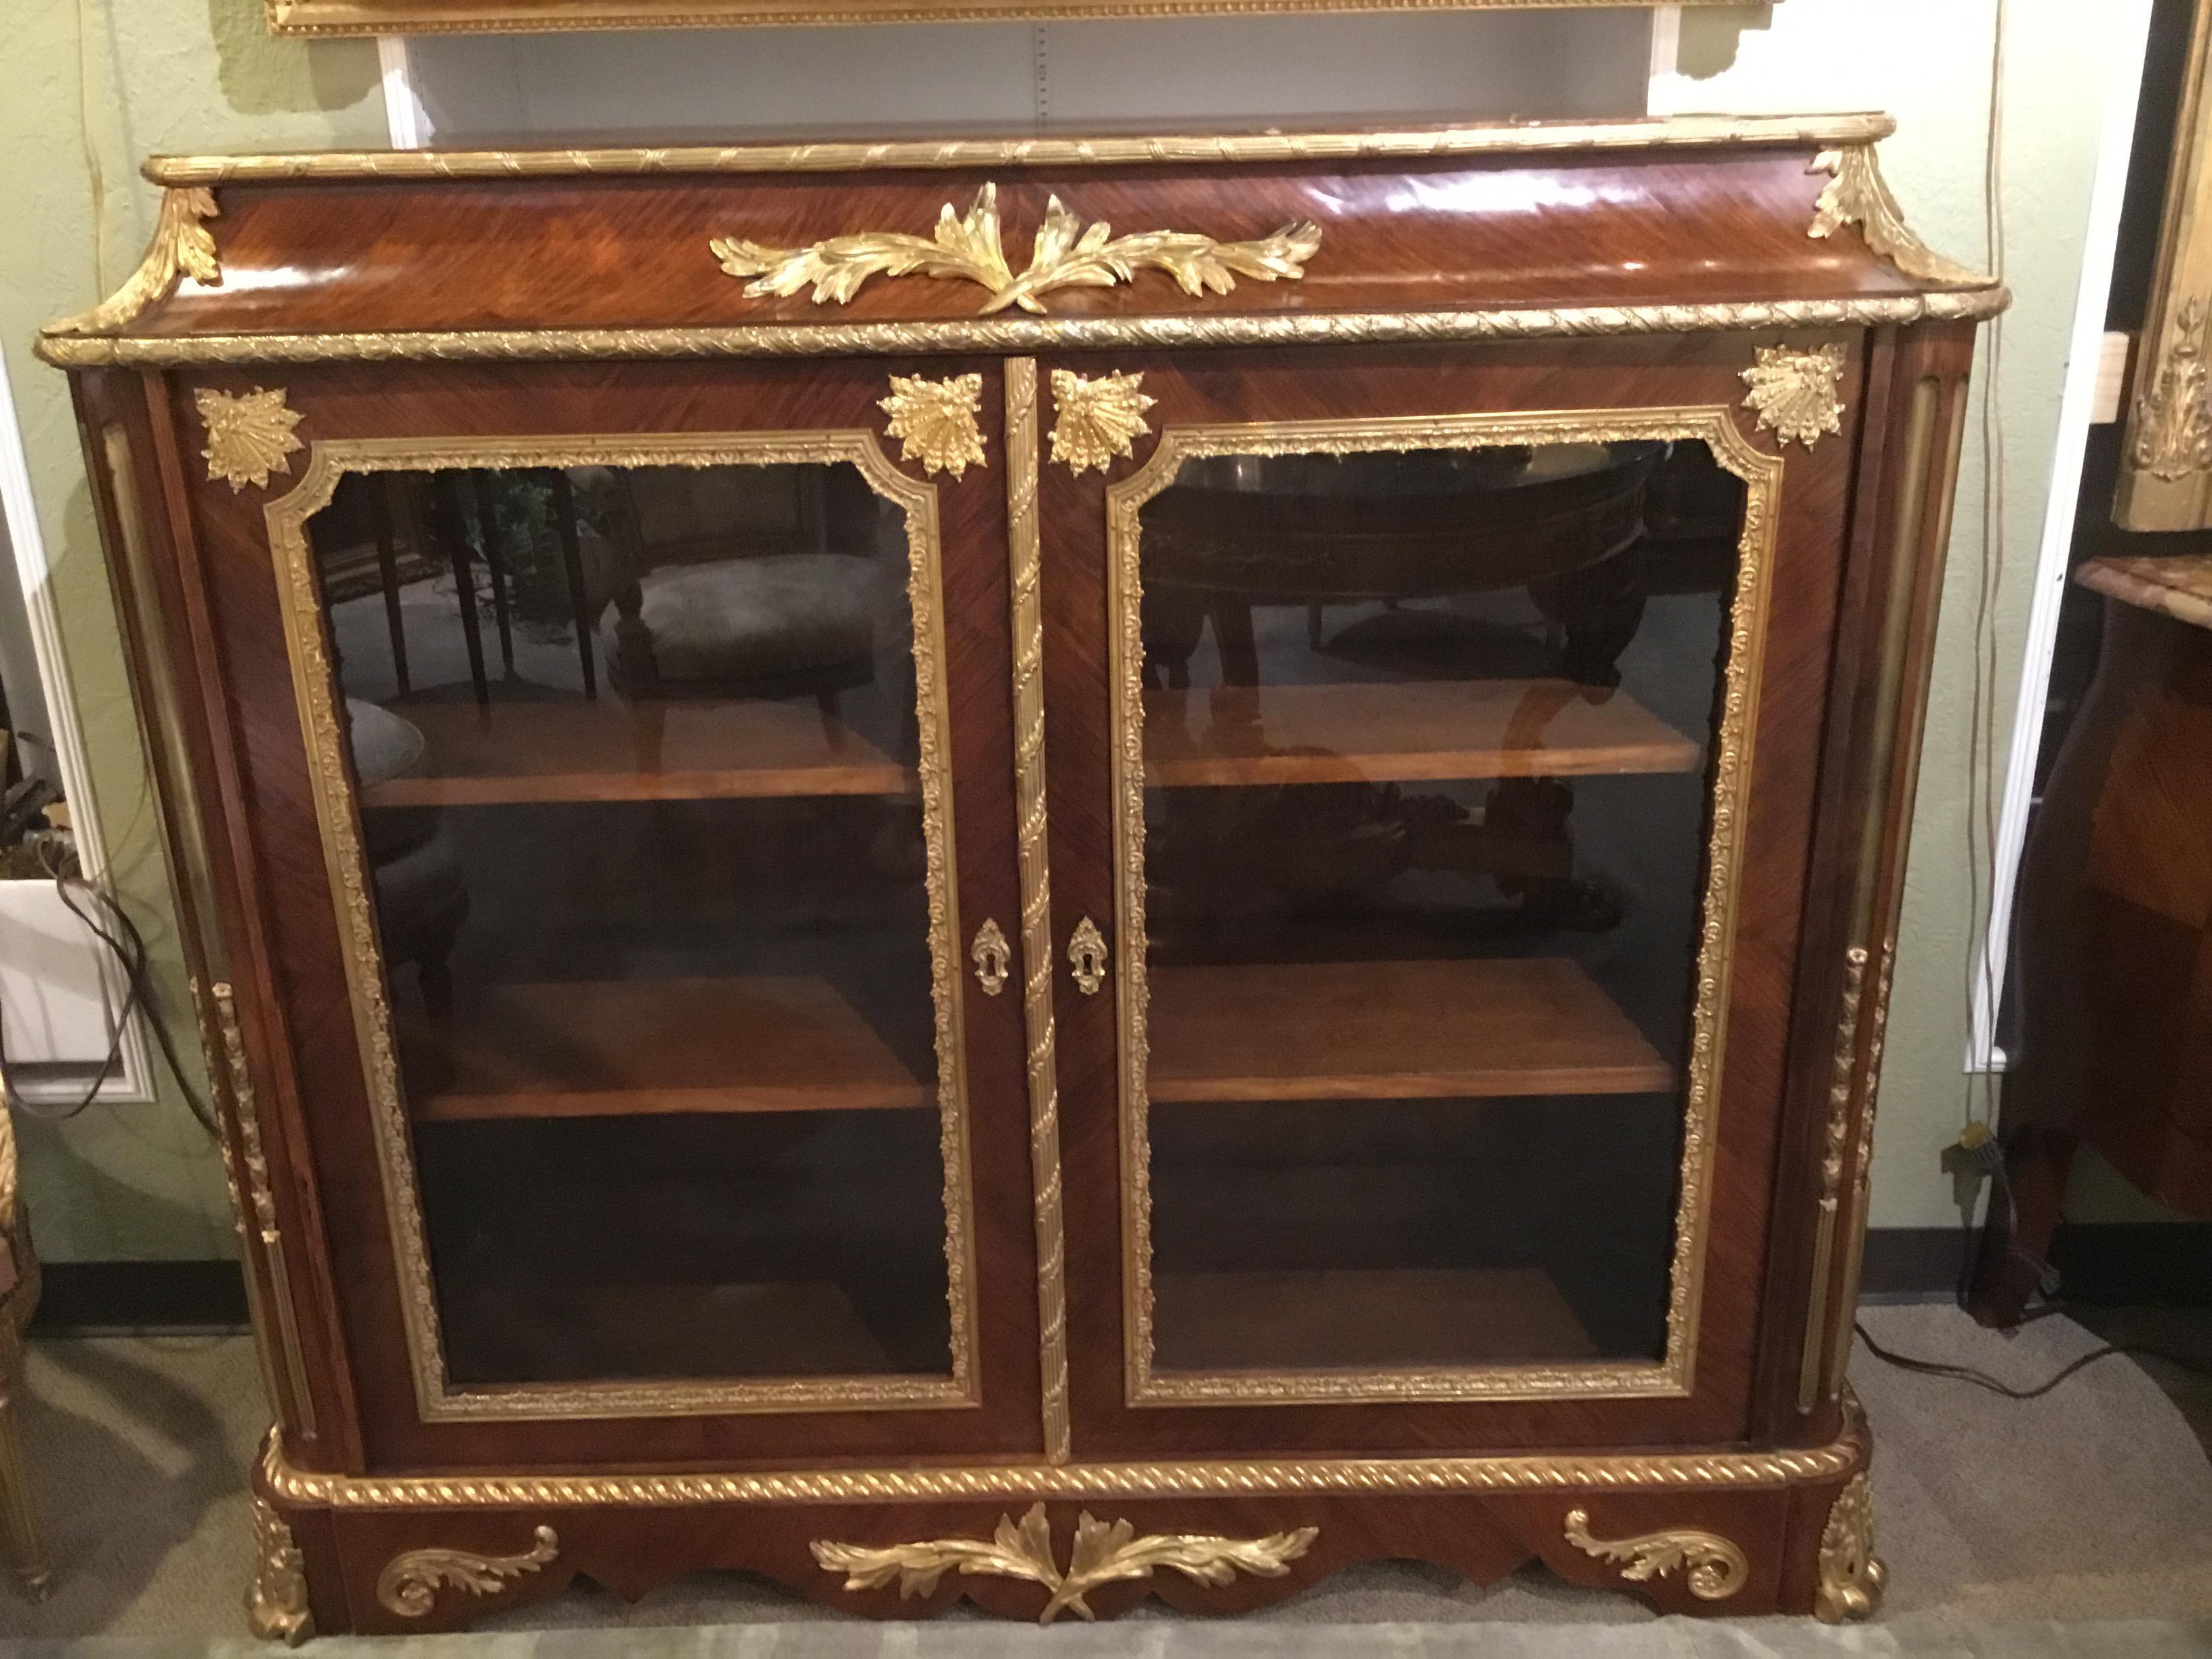 Very fine French vitrine/bibiotheque, late 19th century with fine walnut veneers. Gilt bronze mounts
Enhance the beauty of this piece. Serpentine upper portion of the cabinet adds a sculptured look
To the cabinet. Two glazed doors open to the